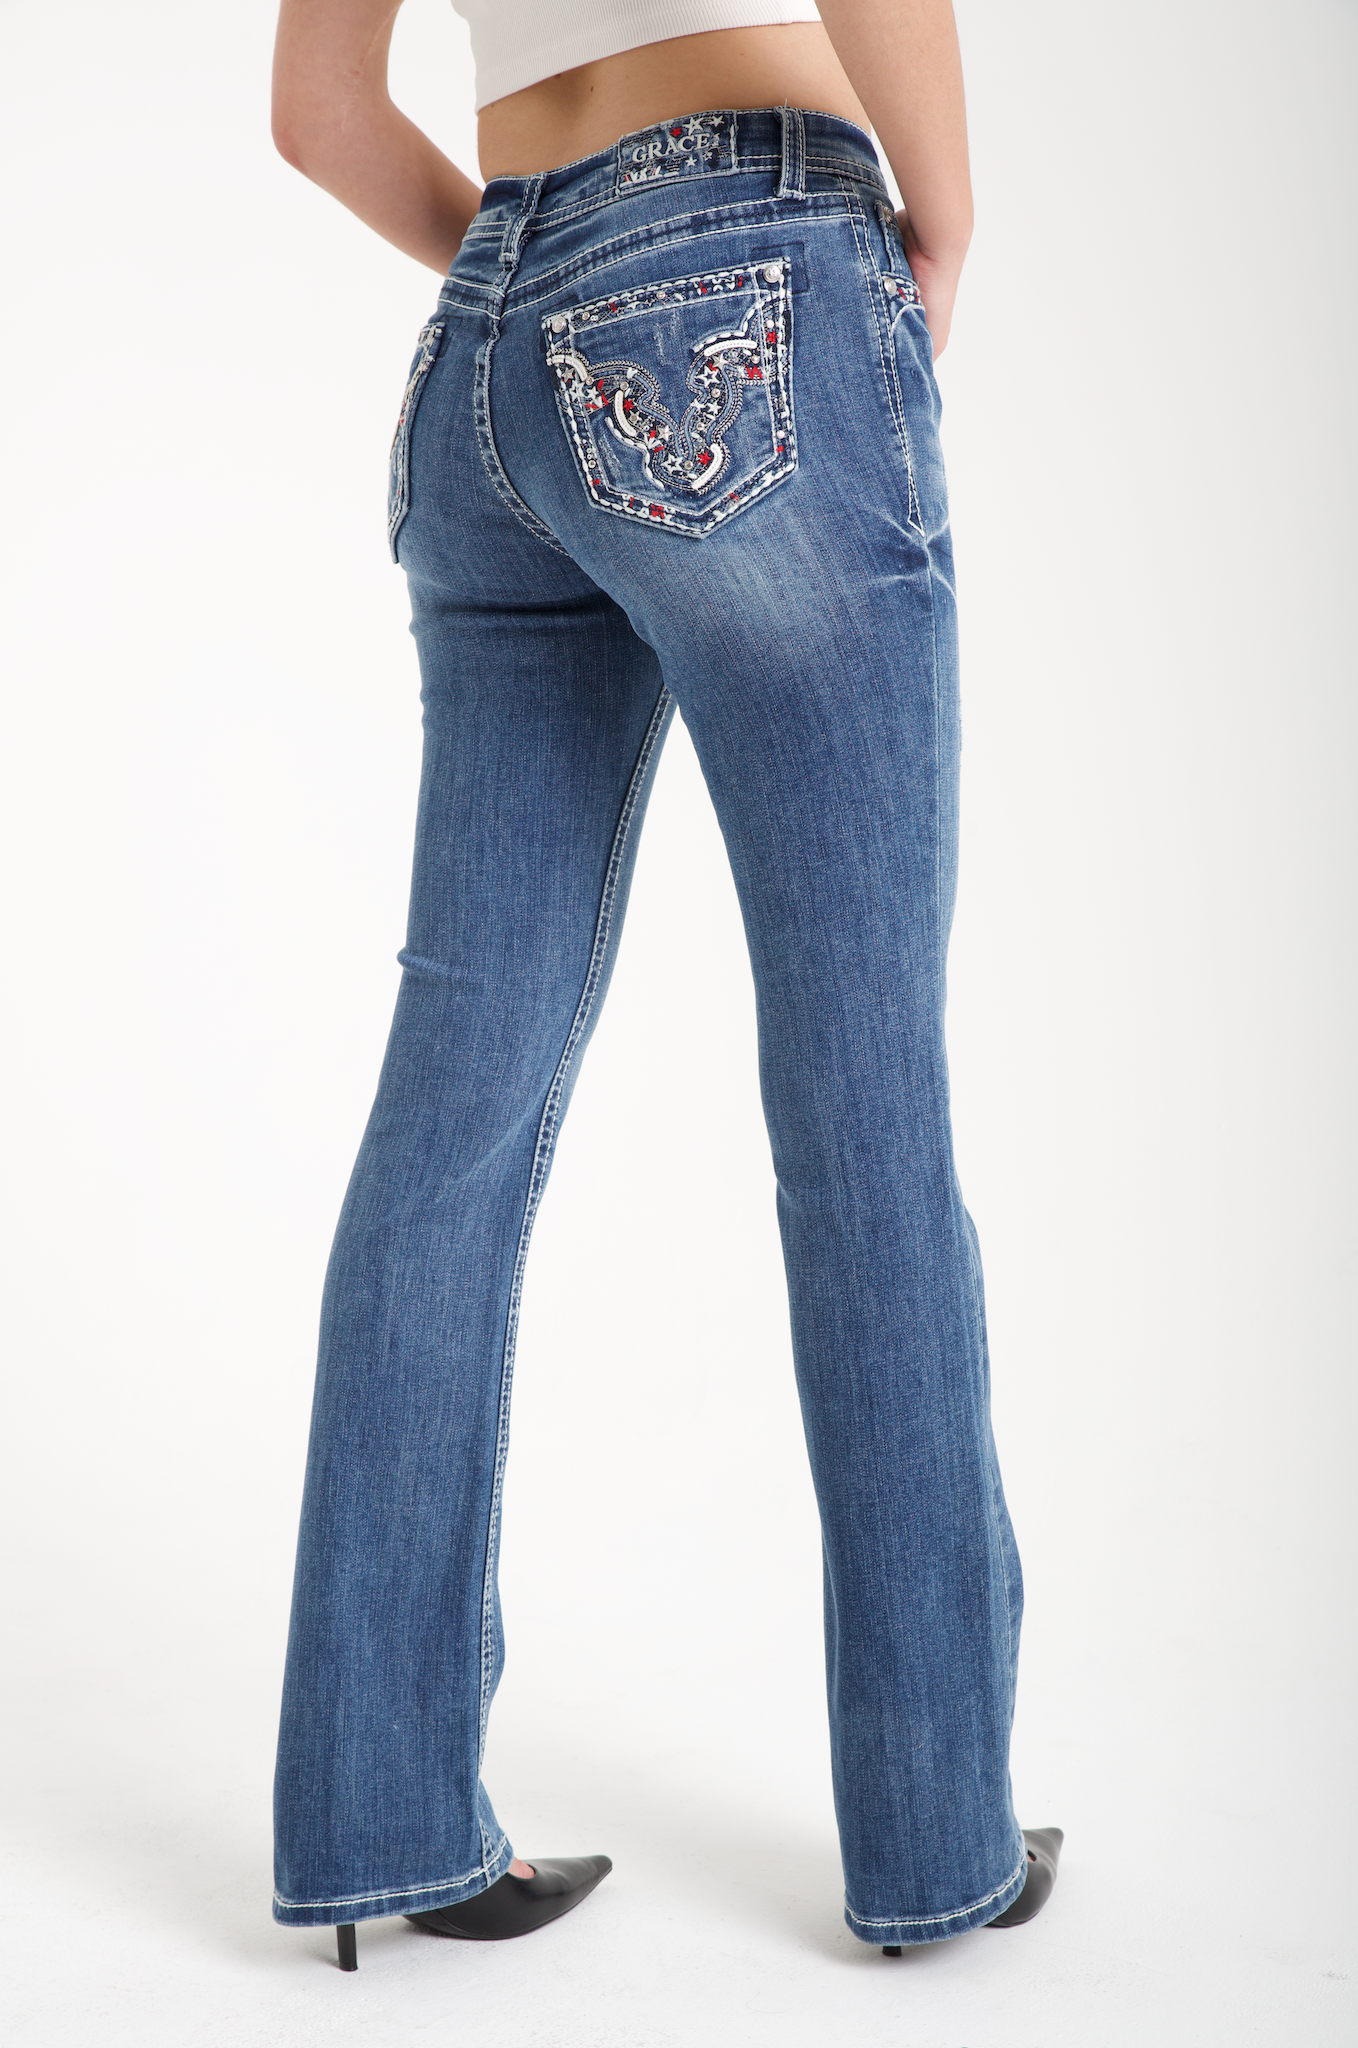 American Steer Head Embellished Mid Rise Bootcut Jeans